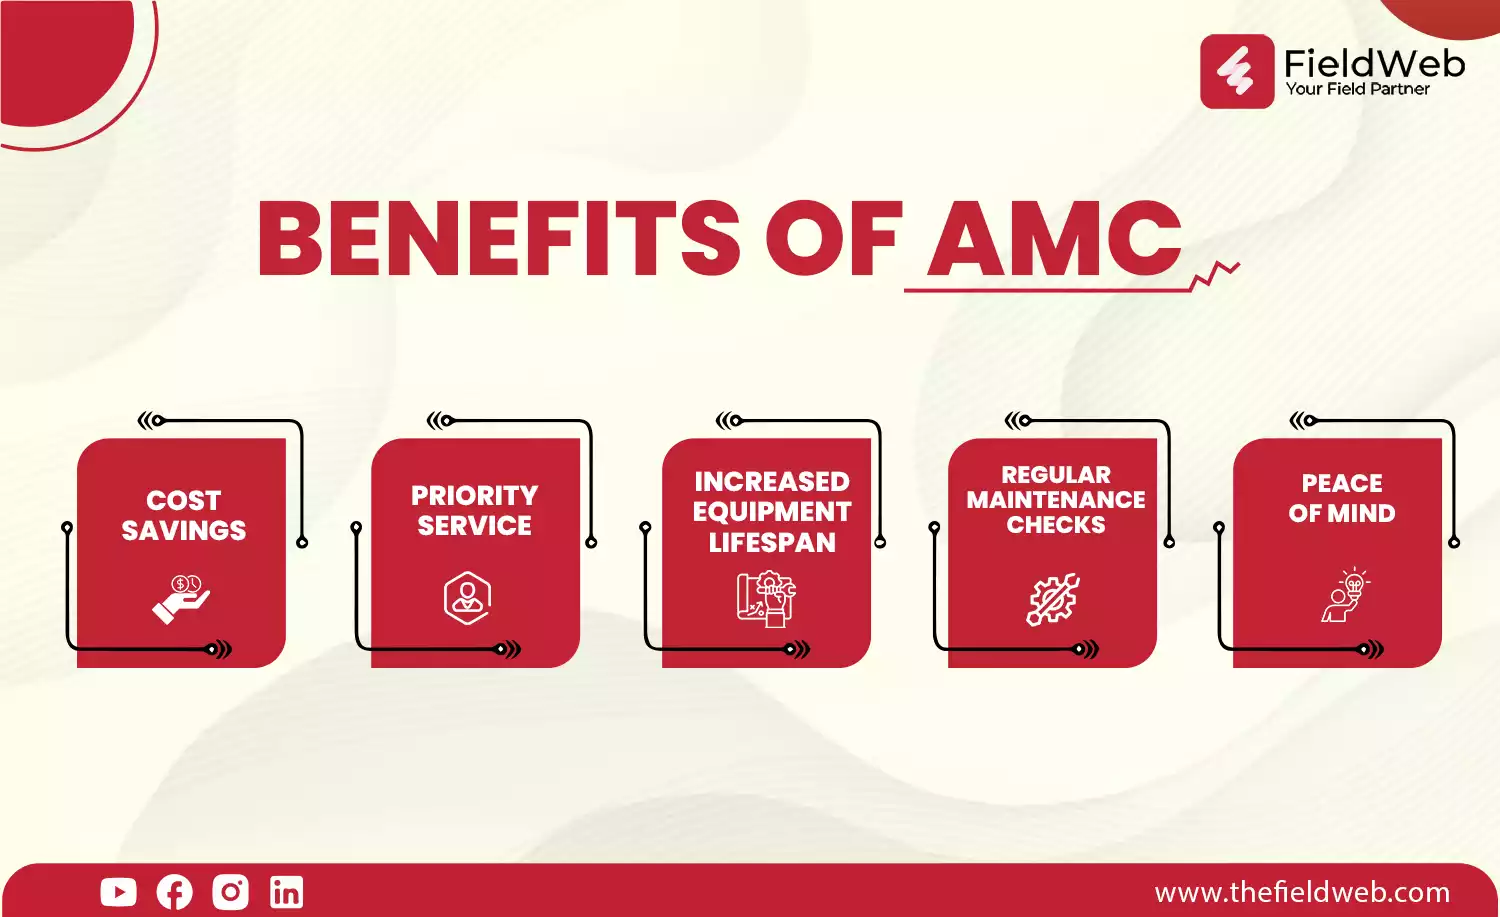 image is displaying 4 benefits of amc management in the red box